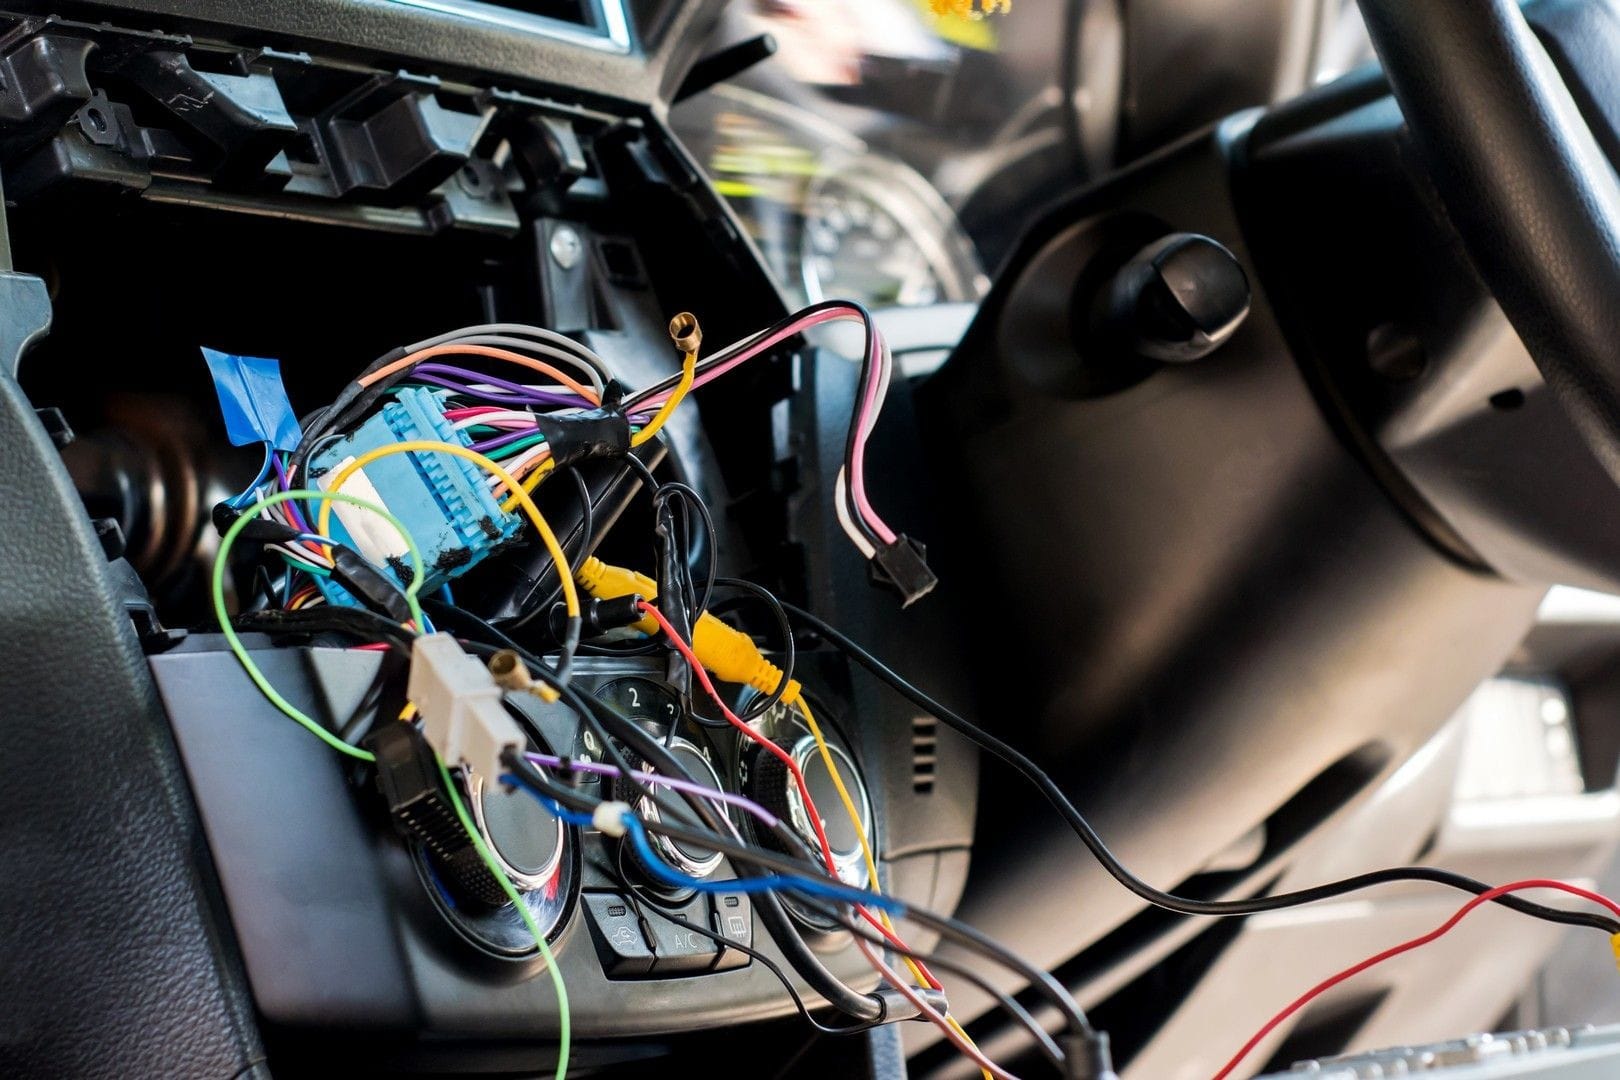 Auto electrical services and repairs